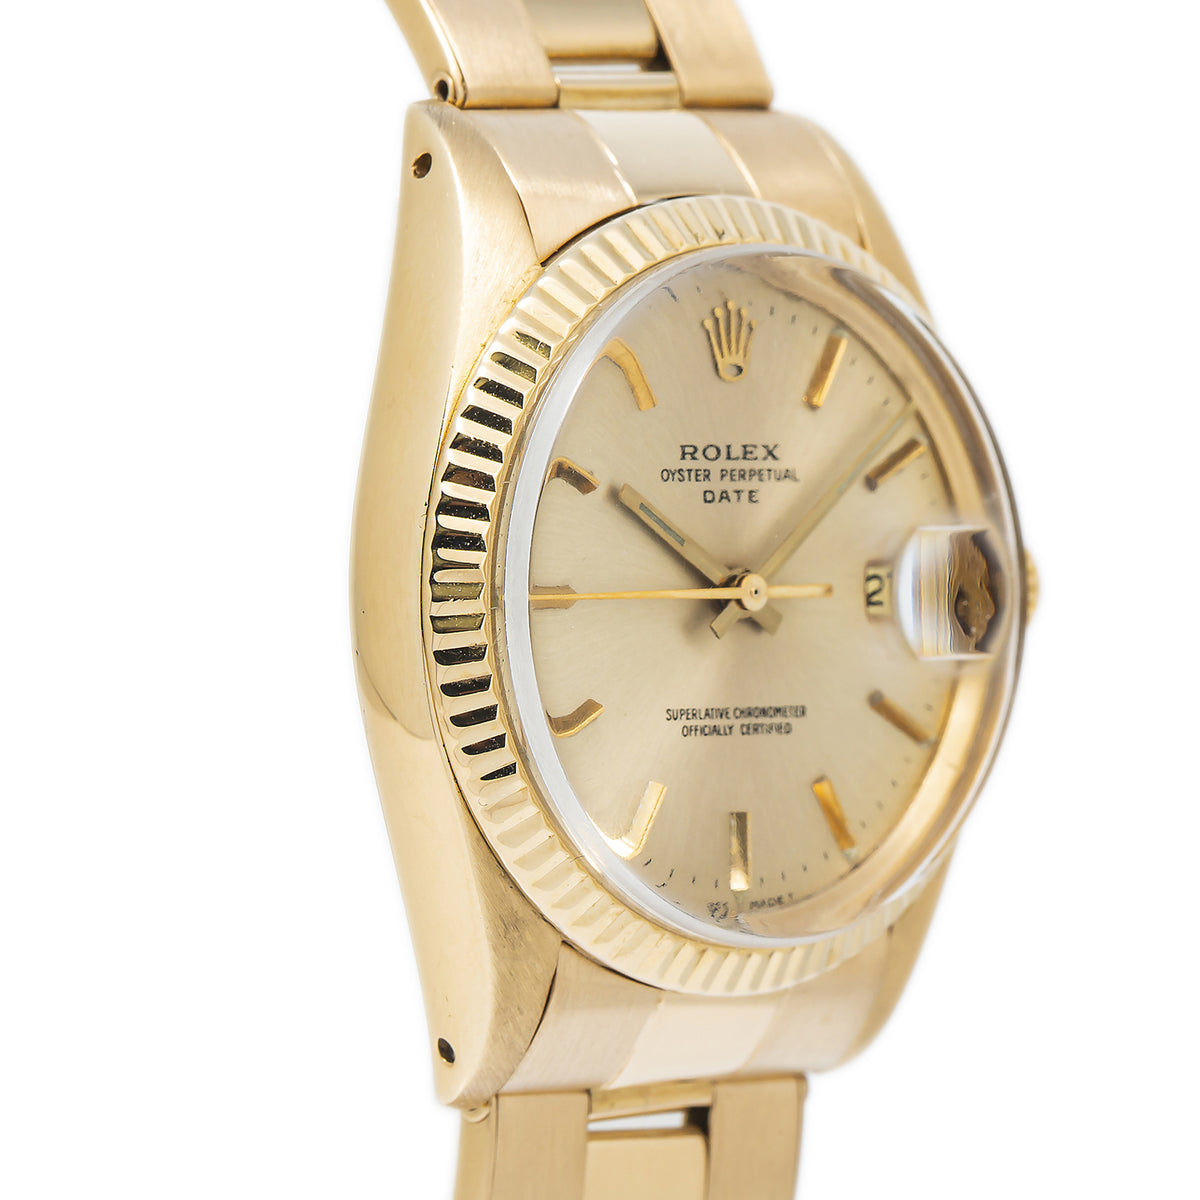 Rolex Date 1500 Oyster 18k Yellow Gold Automatic Champagne Dial Men's Watch 34mm